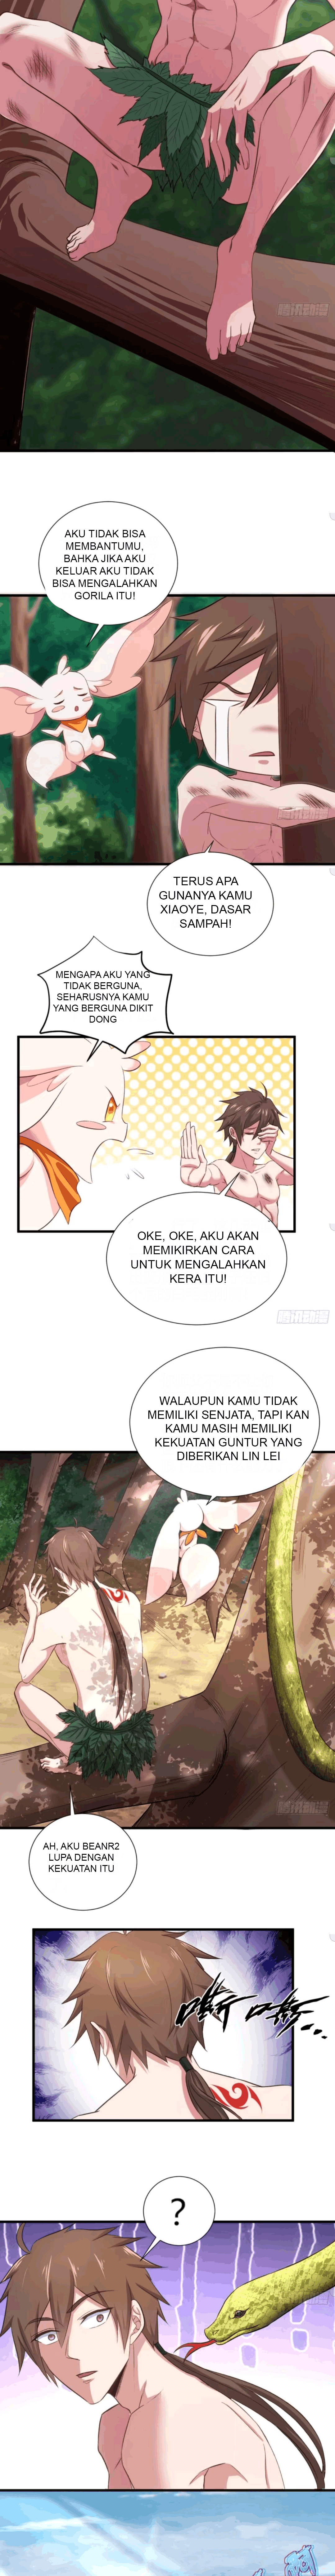 My Harem Depend on Drawing Cards Chapter 32